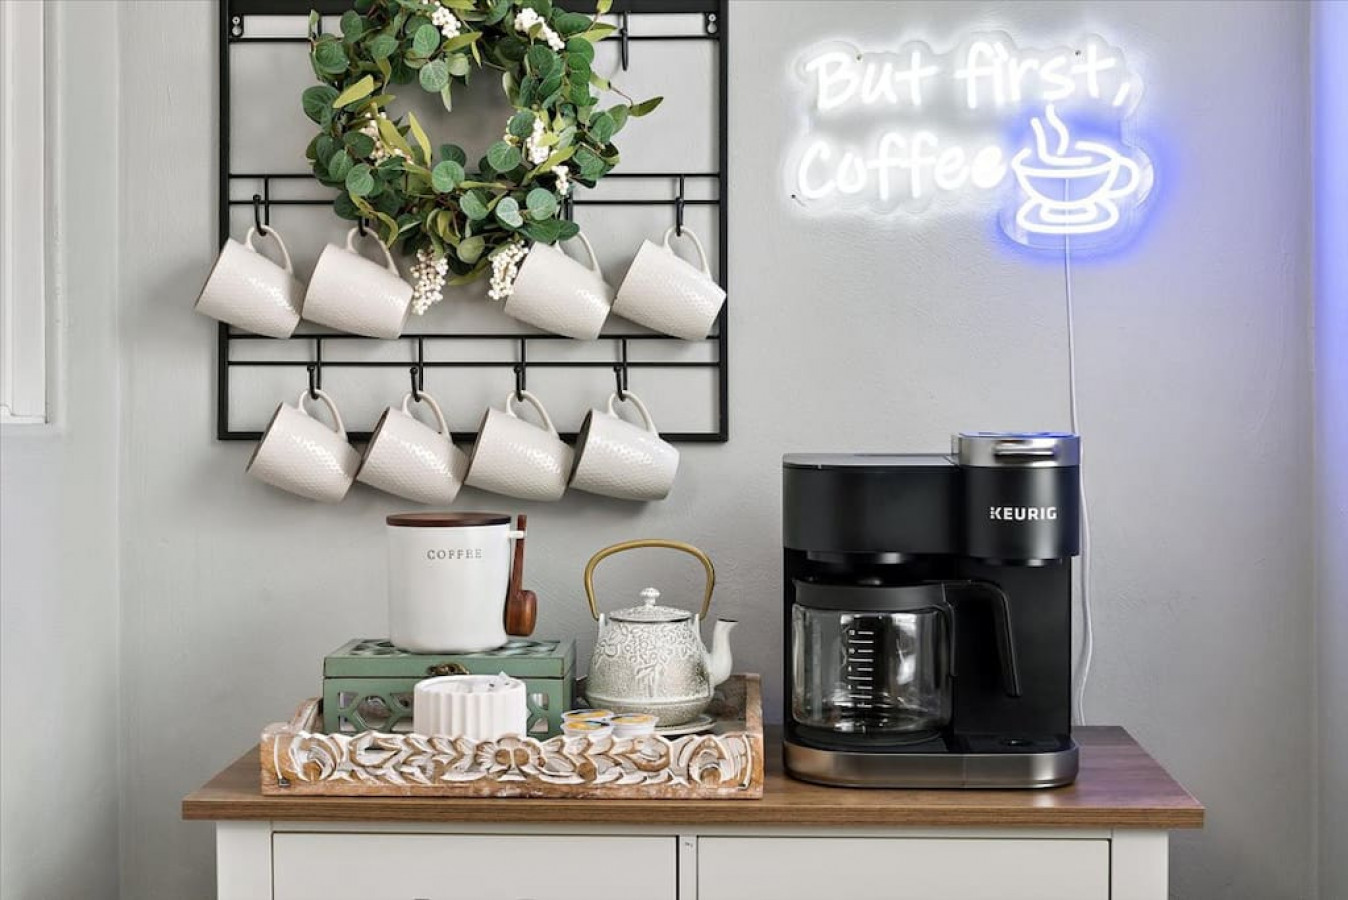 Chic coffee corner with modern appliances and neon sign, crafted by Kindred Design.